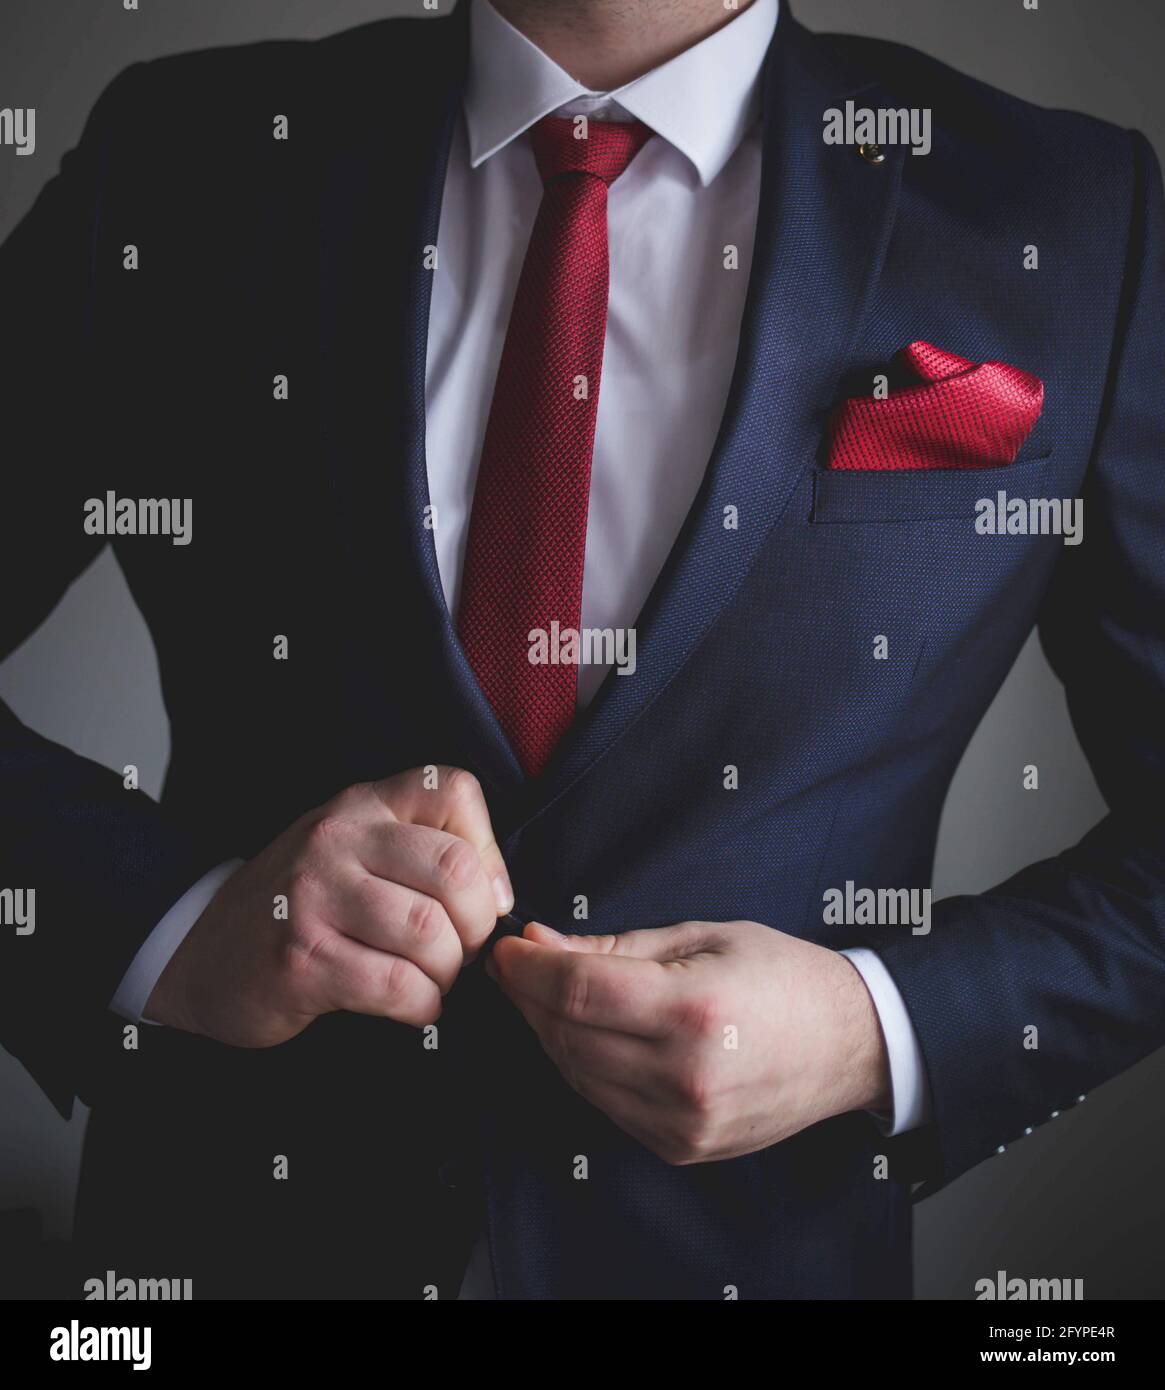 Man In A Blue Suit And Red Tie Buttoning His Suit Jacket Stock Photo - Alamy